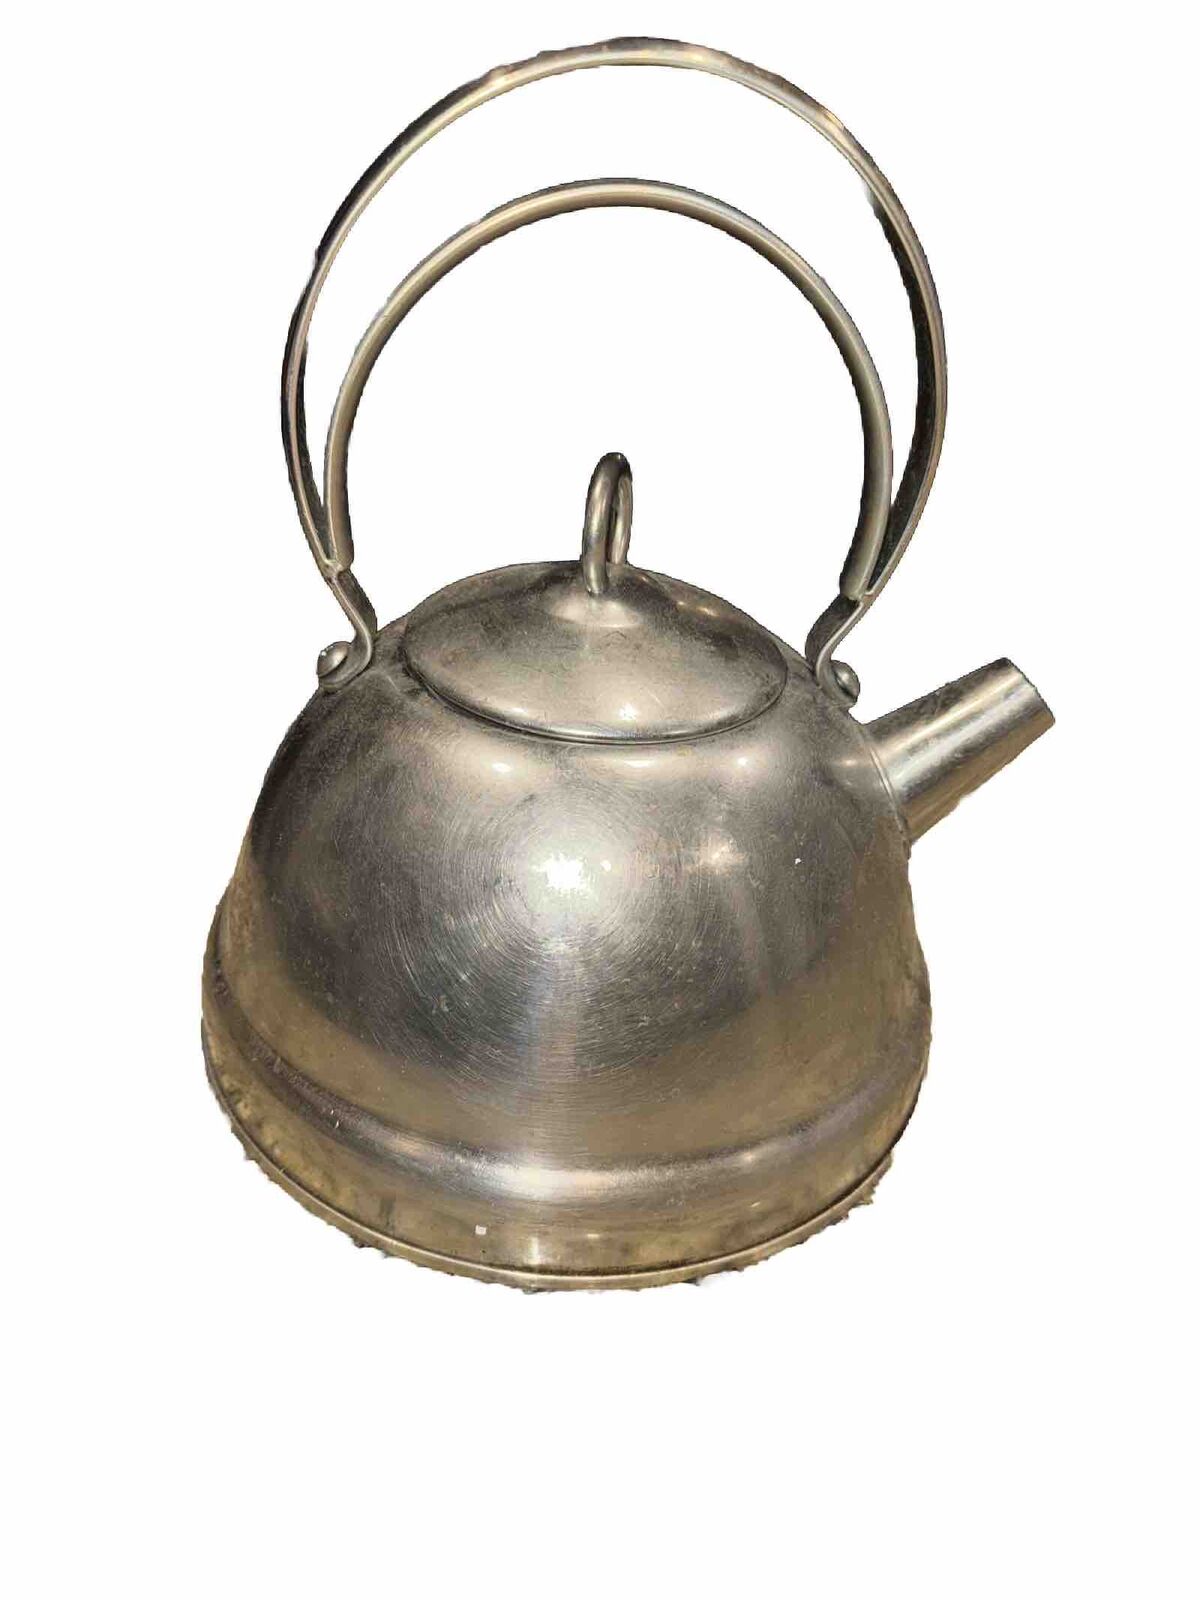 Vintage Stainless Steel Whistling Tea Kettle Teapot 2Qt 9Cup